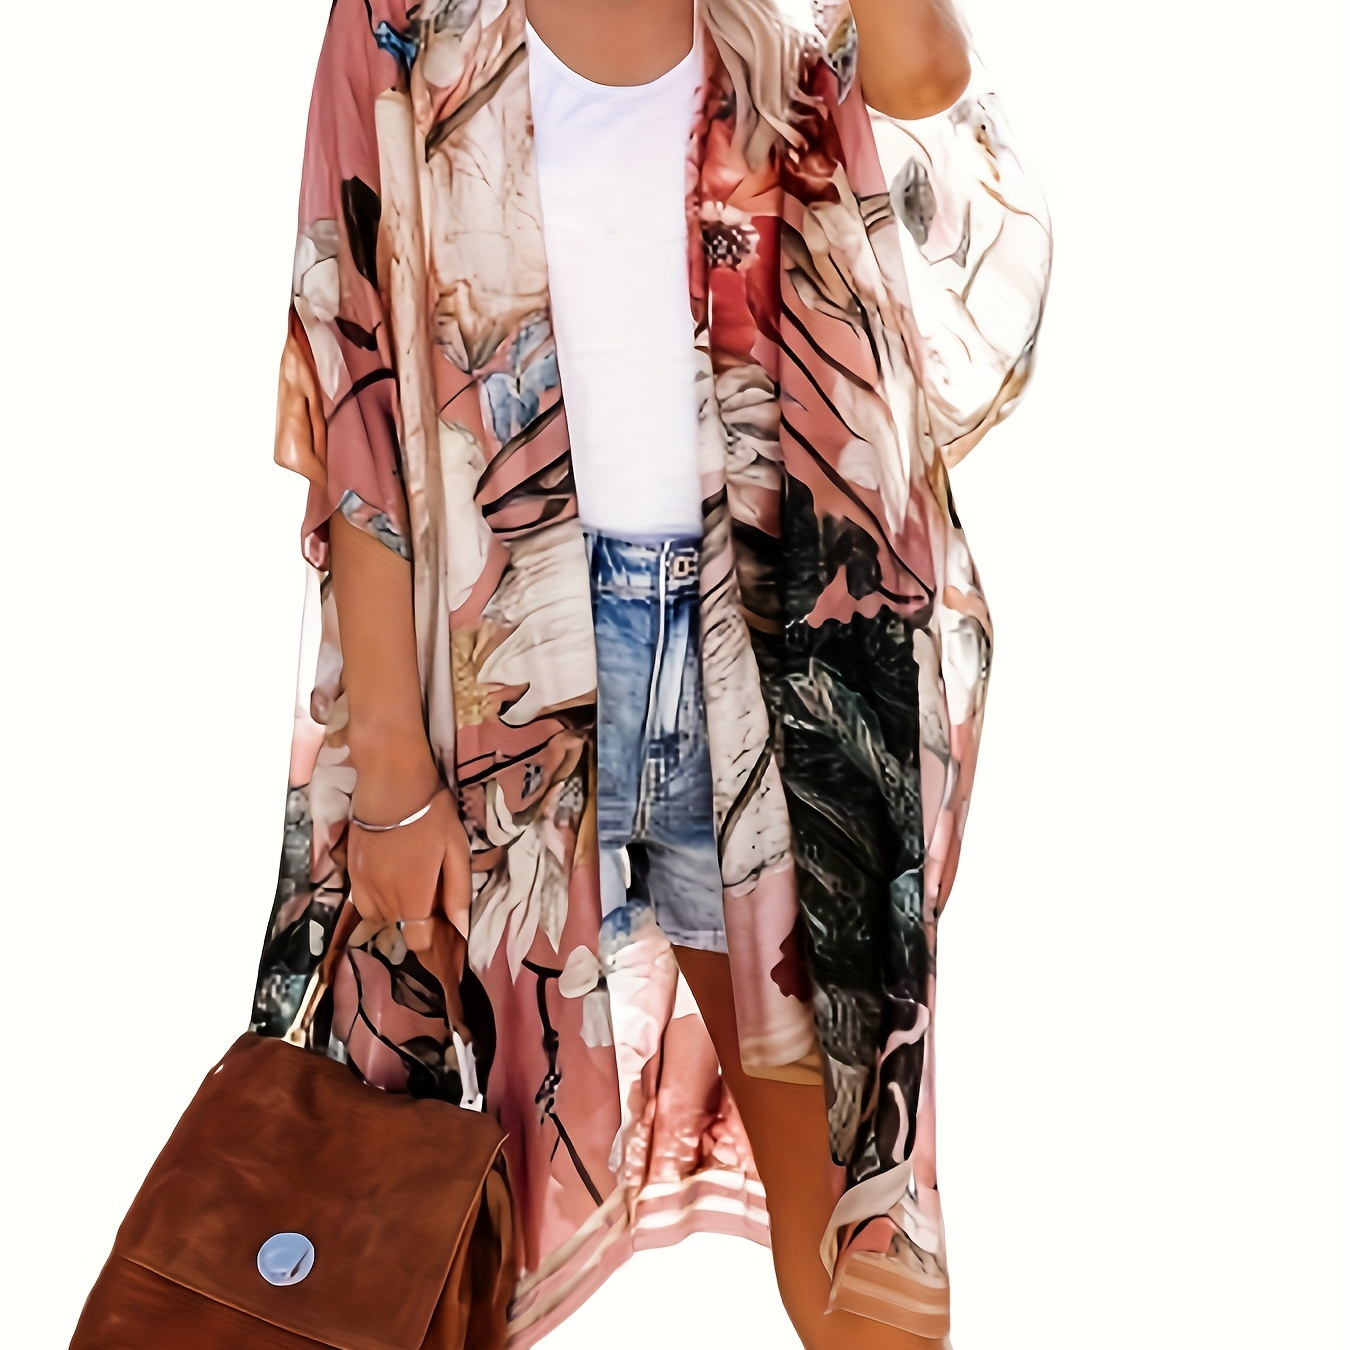 

Floral Print Half Kimono Sleeve Cover Up, Comfy Loose Open Front Cardigan Beachwear, Stylish Vacation Style, Women's Swimwear & Clothing